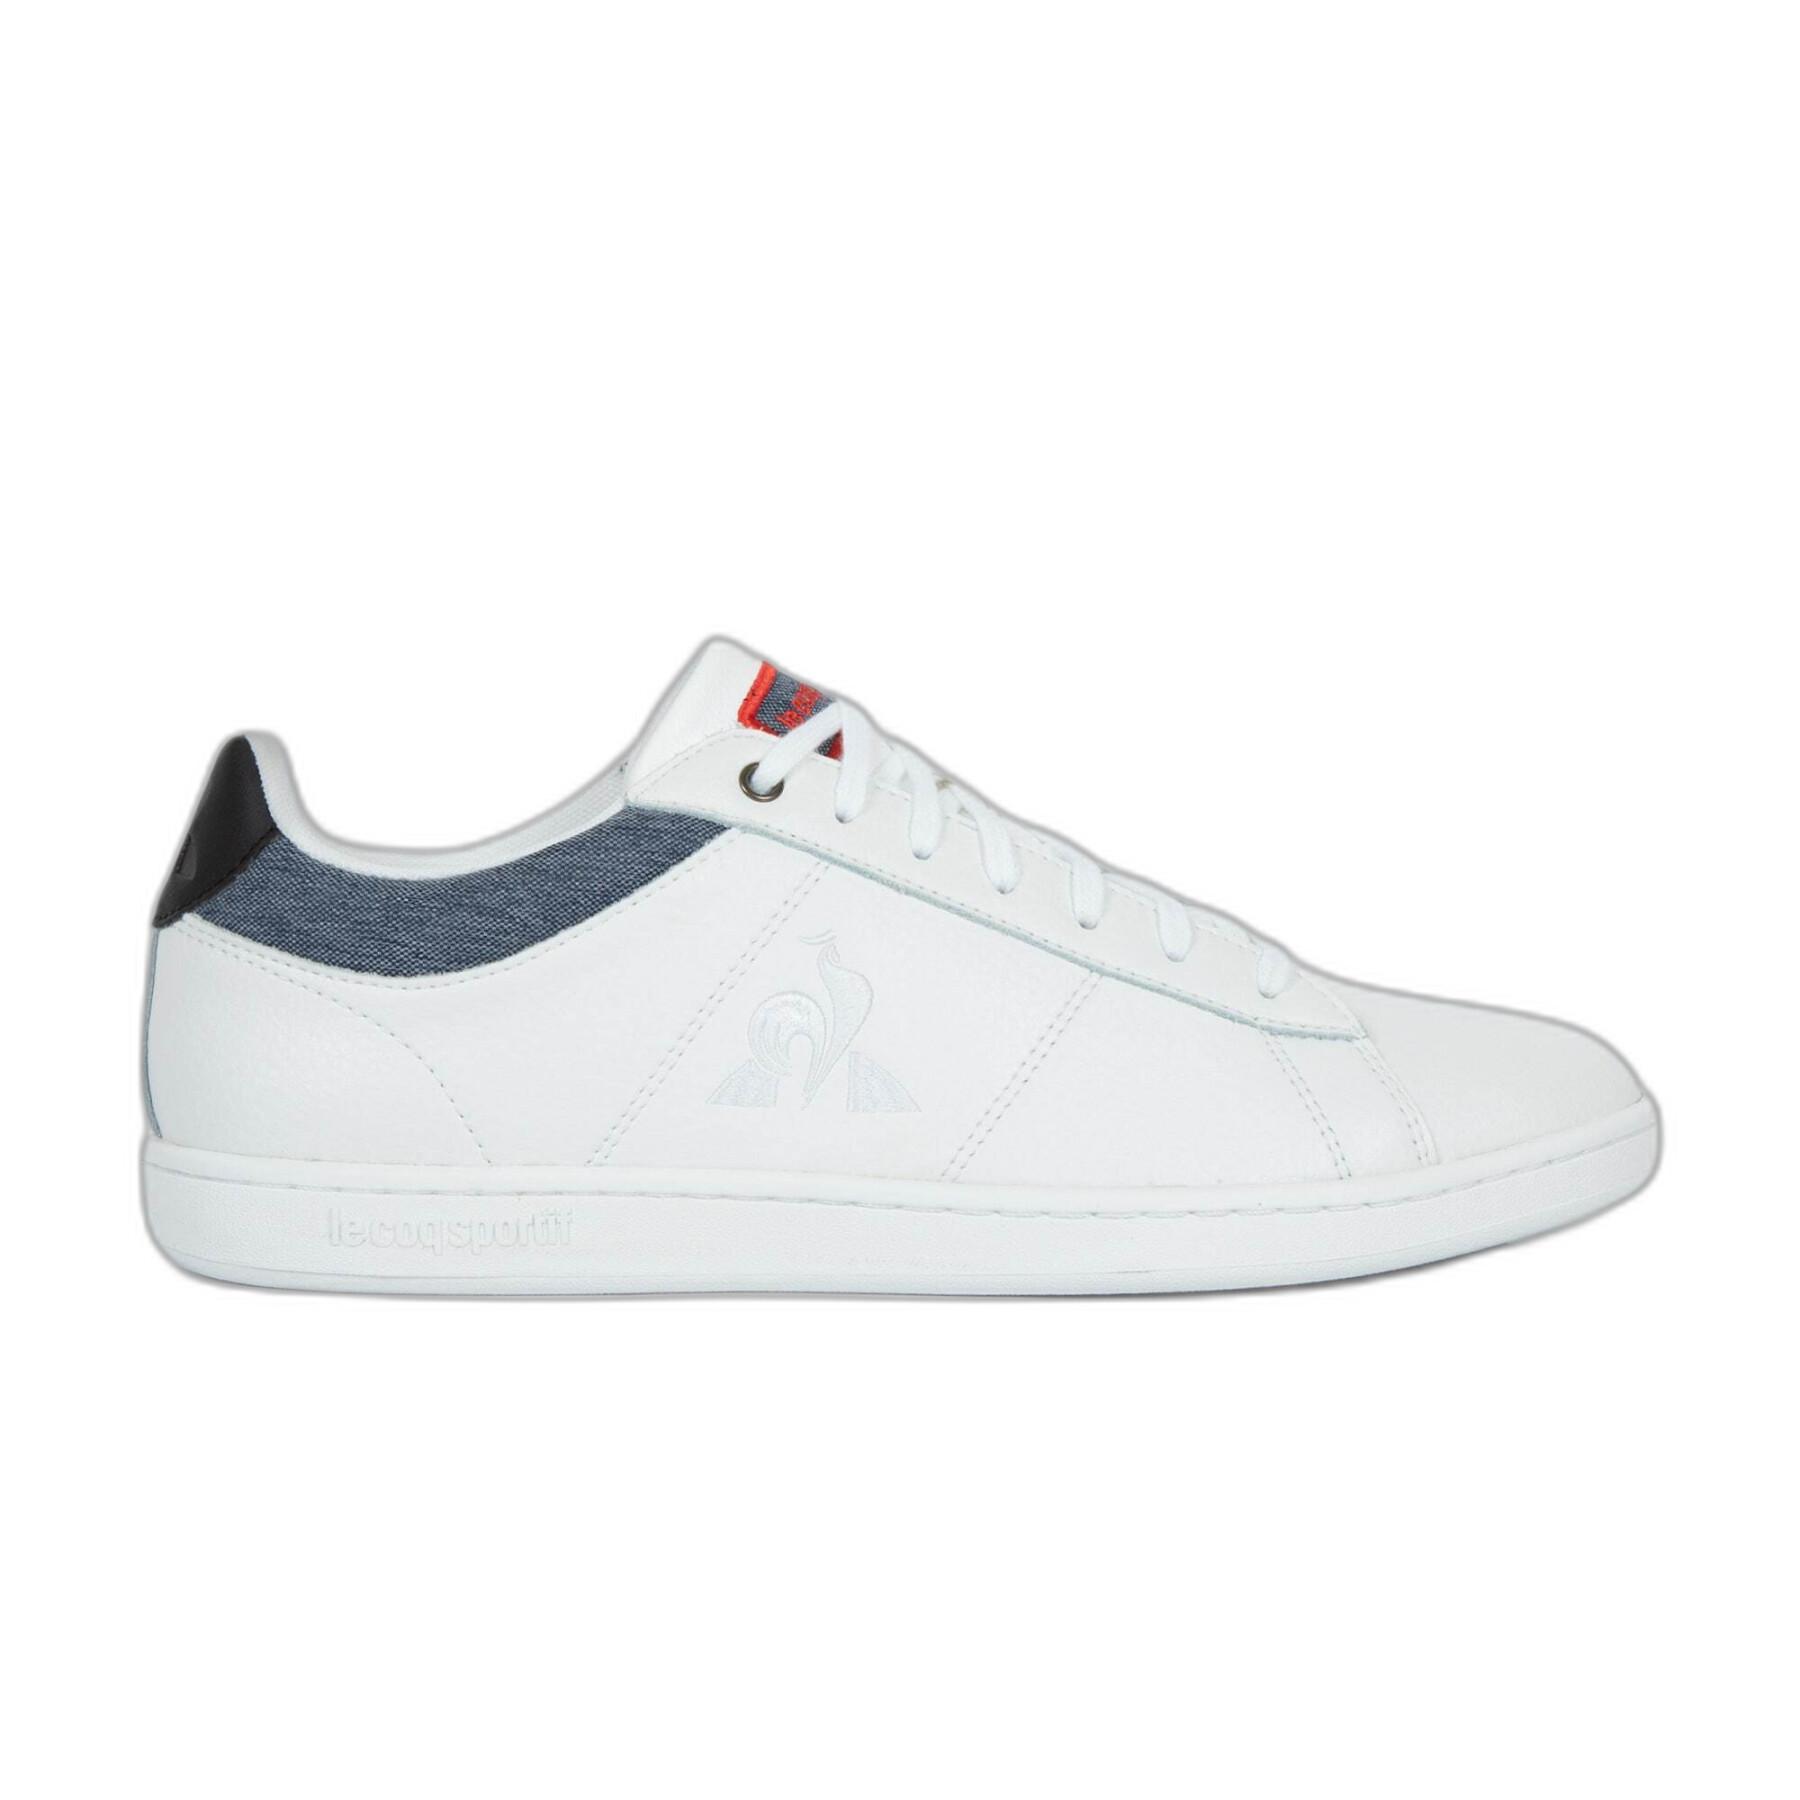 Formadores Le Coq Sportif Court Allure Workwear